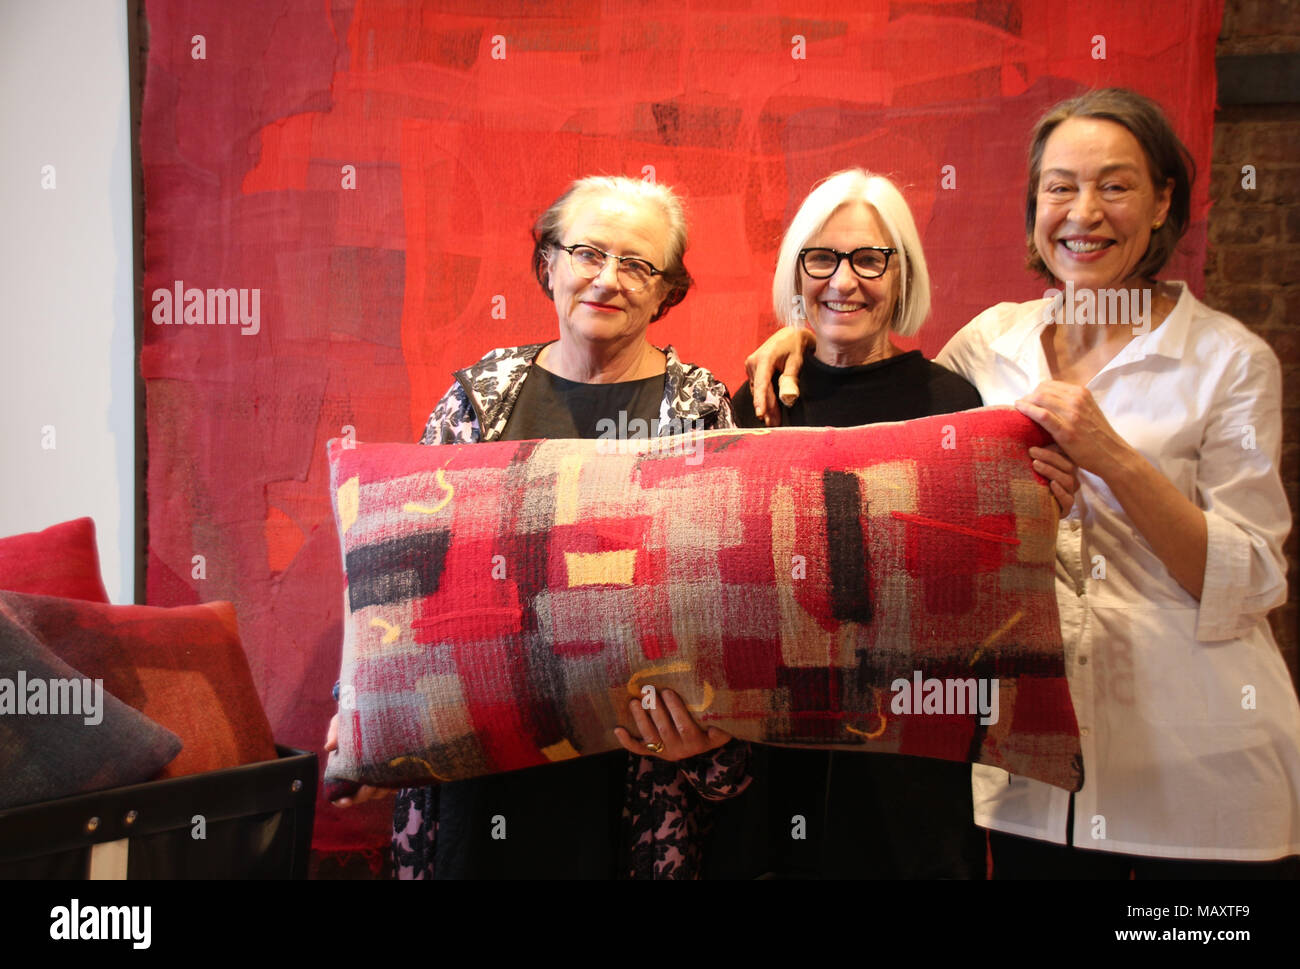 28 March 2018, US, New York: Designer Eileen Fisher (c) and project co-founders Lidewij Edelkoort (l) and Sigi Ahl present their programme 'DesignWork', which aims to turn discarded clothing into something new, whether it be pillows, bags or art. Discarded clothes make up 8% of the city's total waste. Photo: Christina Horsten/dpa Stock Photo